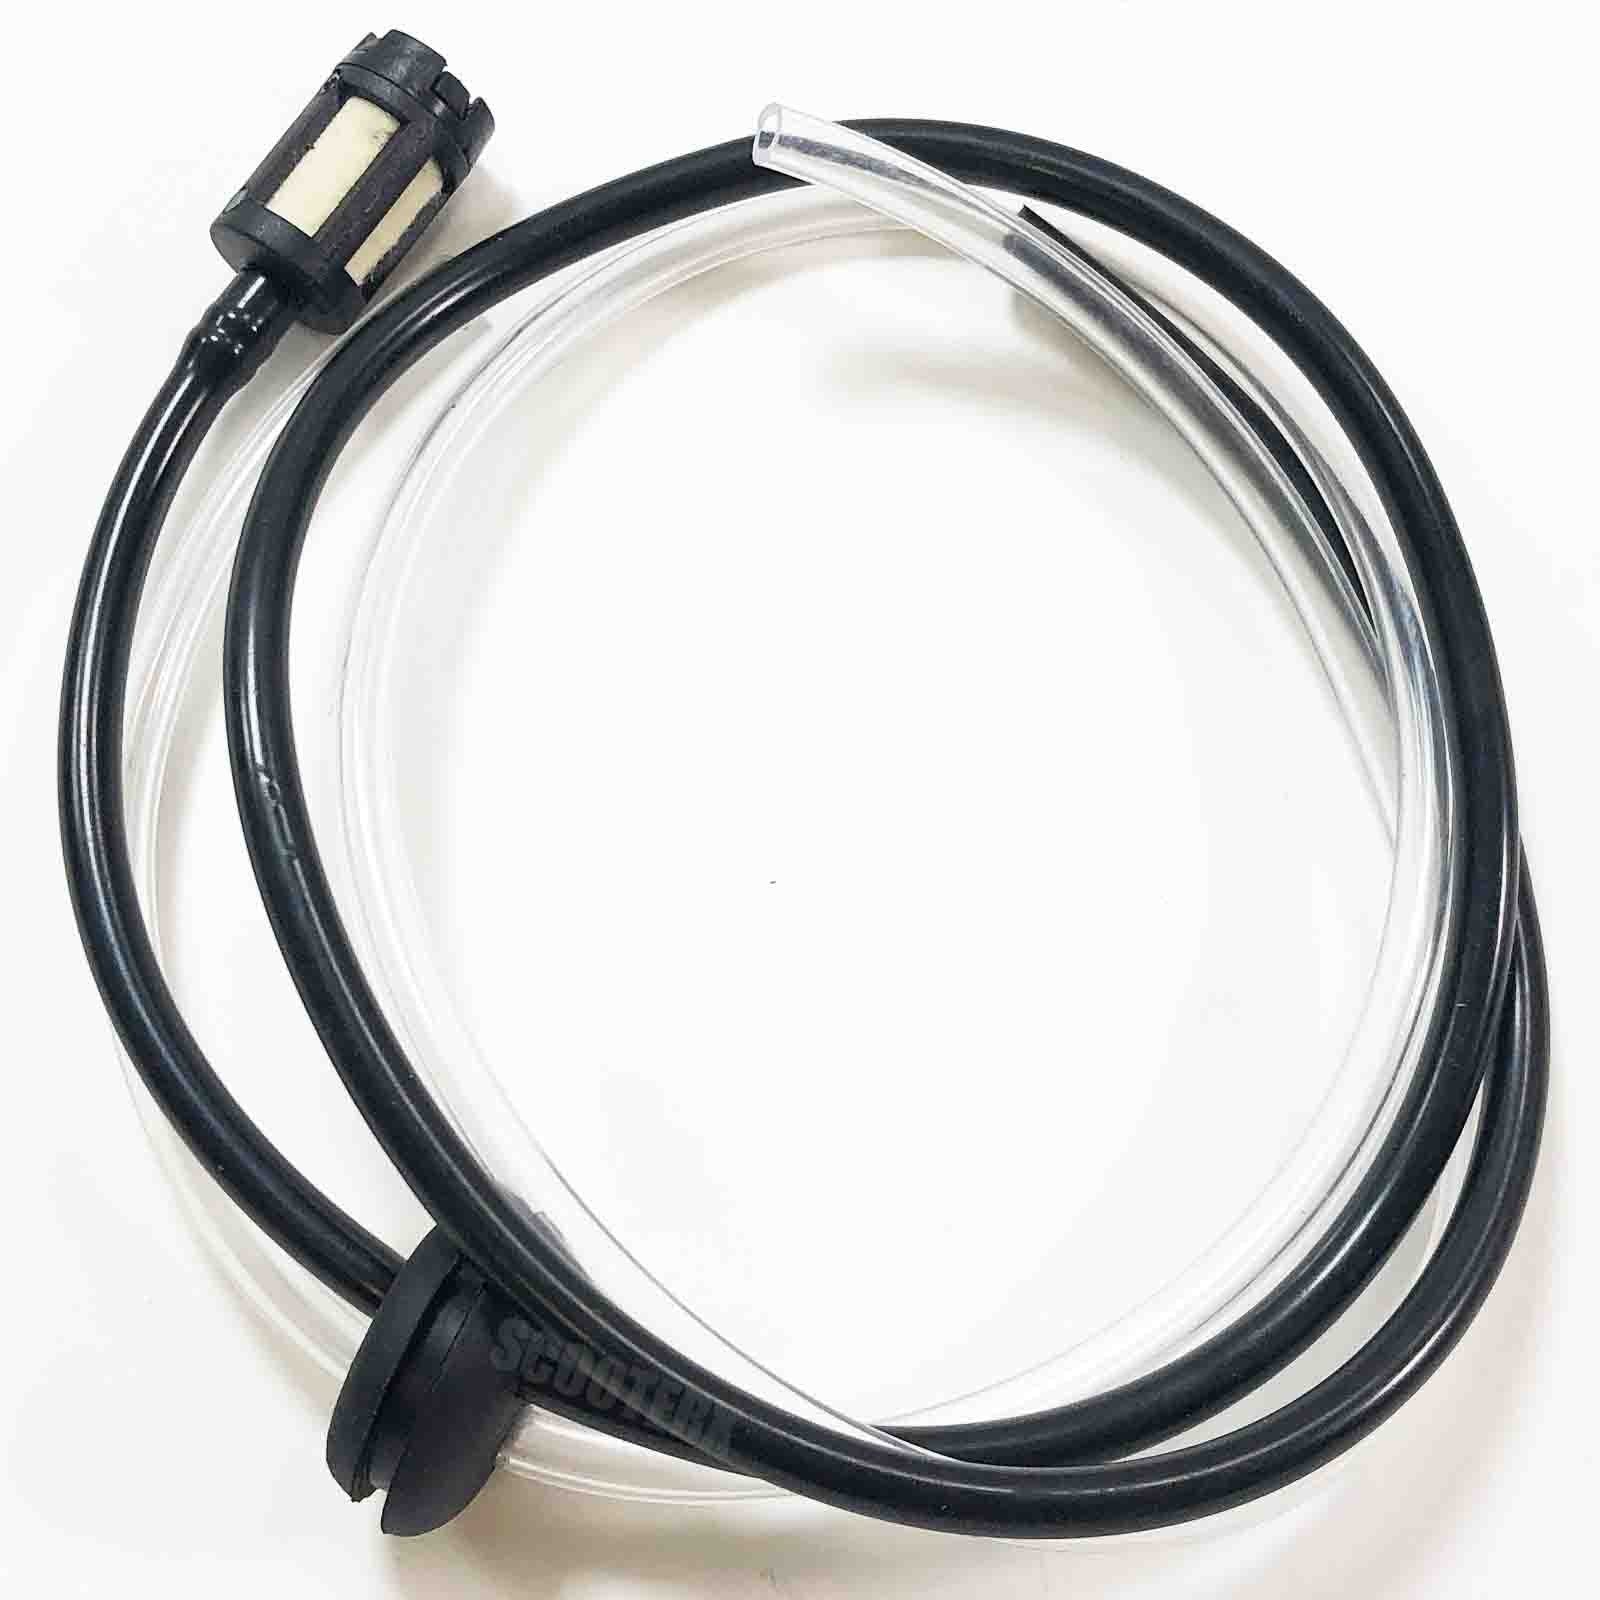 ScooterX FUEL LINES 24" For Dirt Dog Gas Scooter